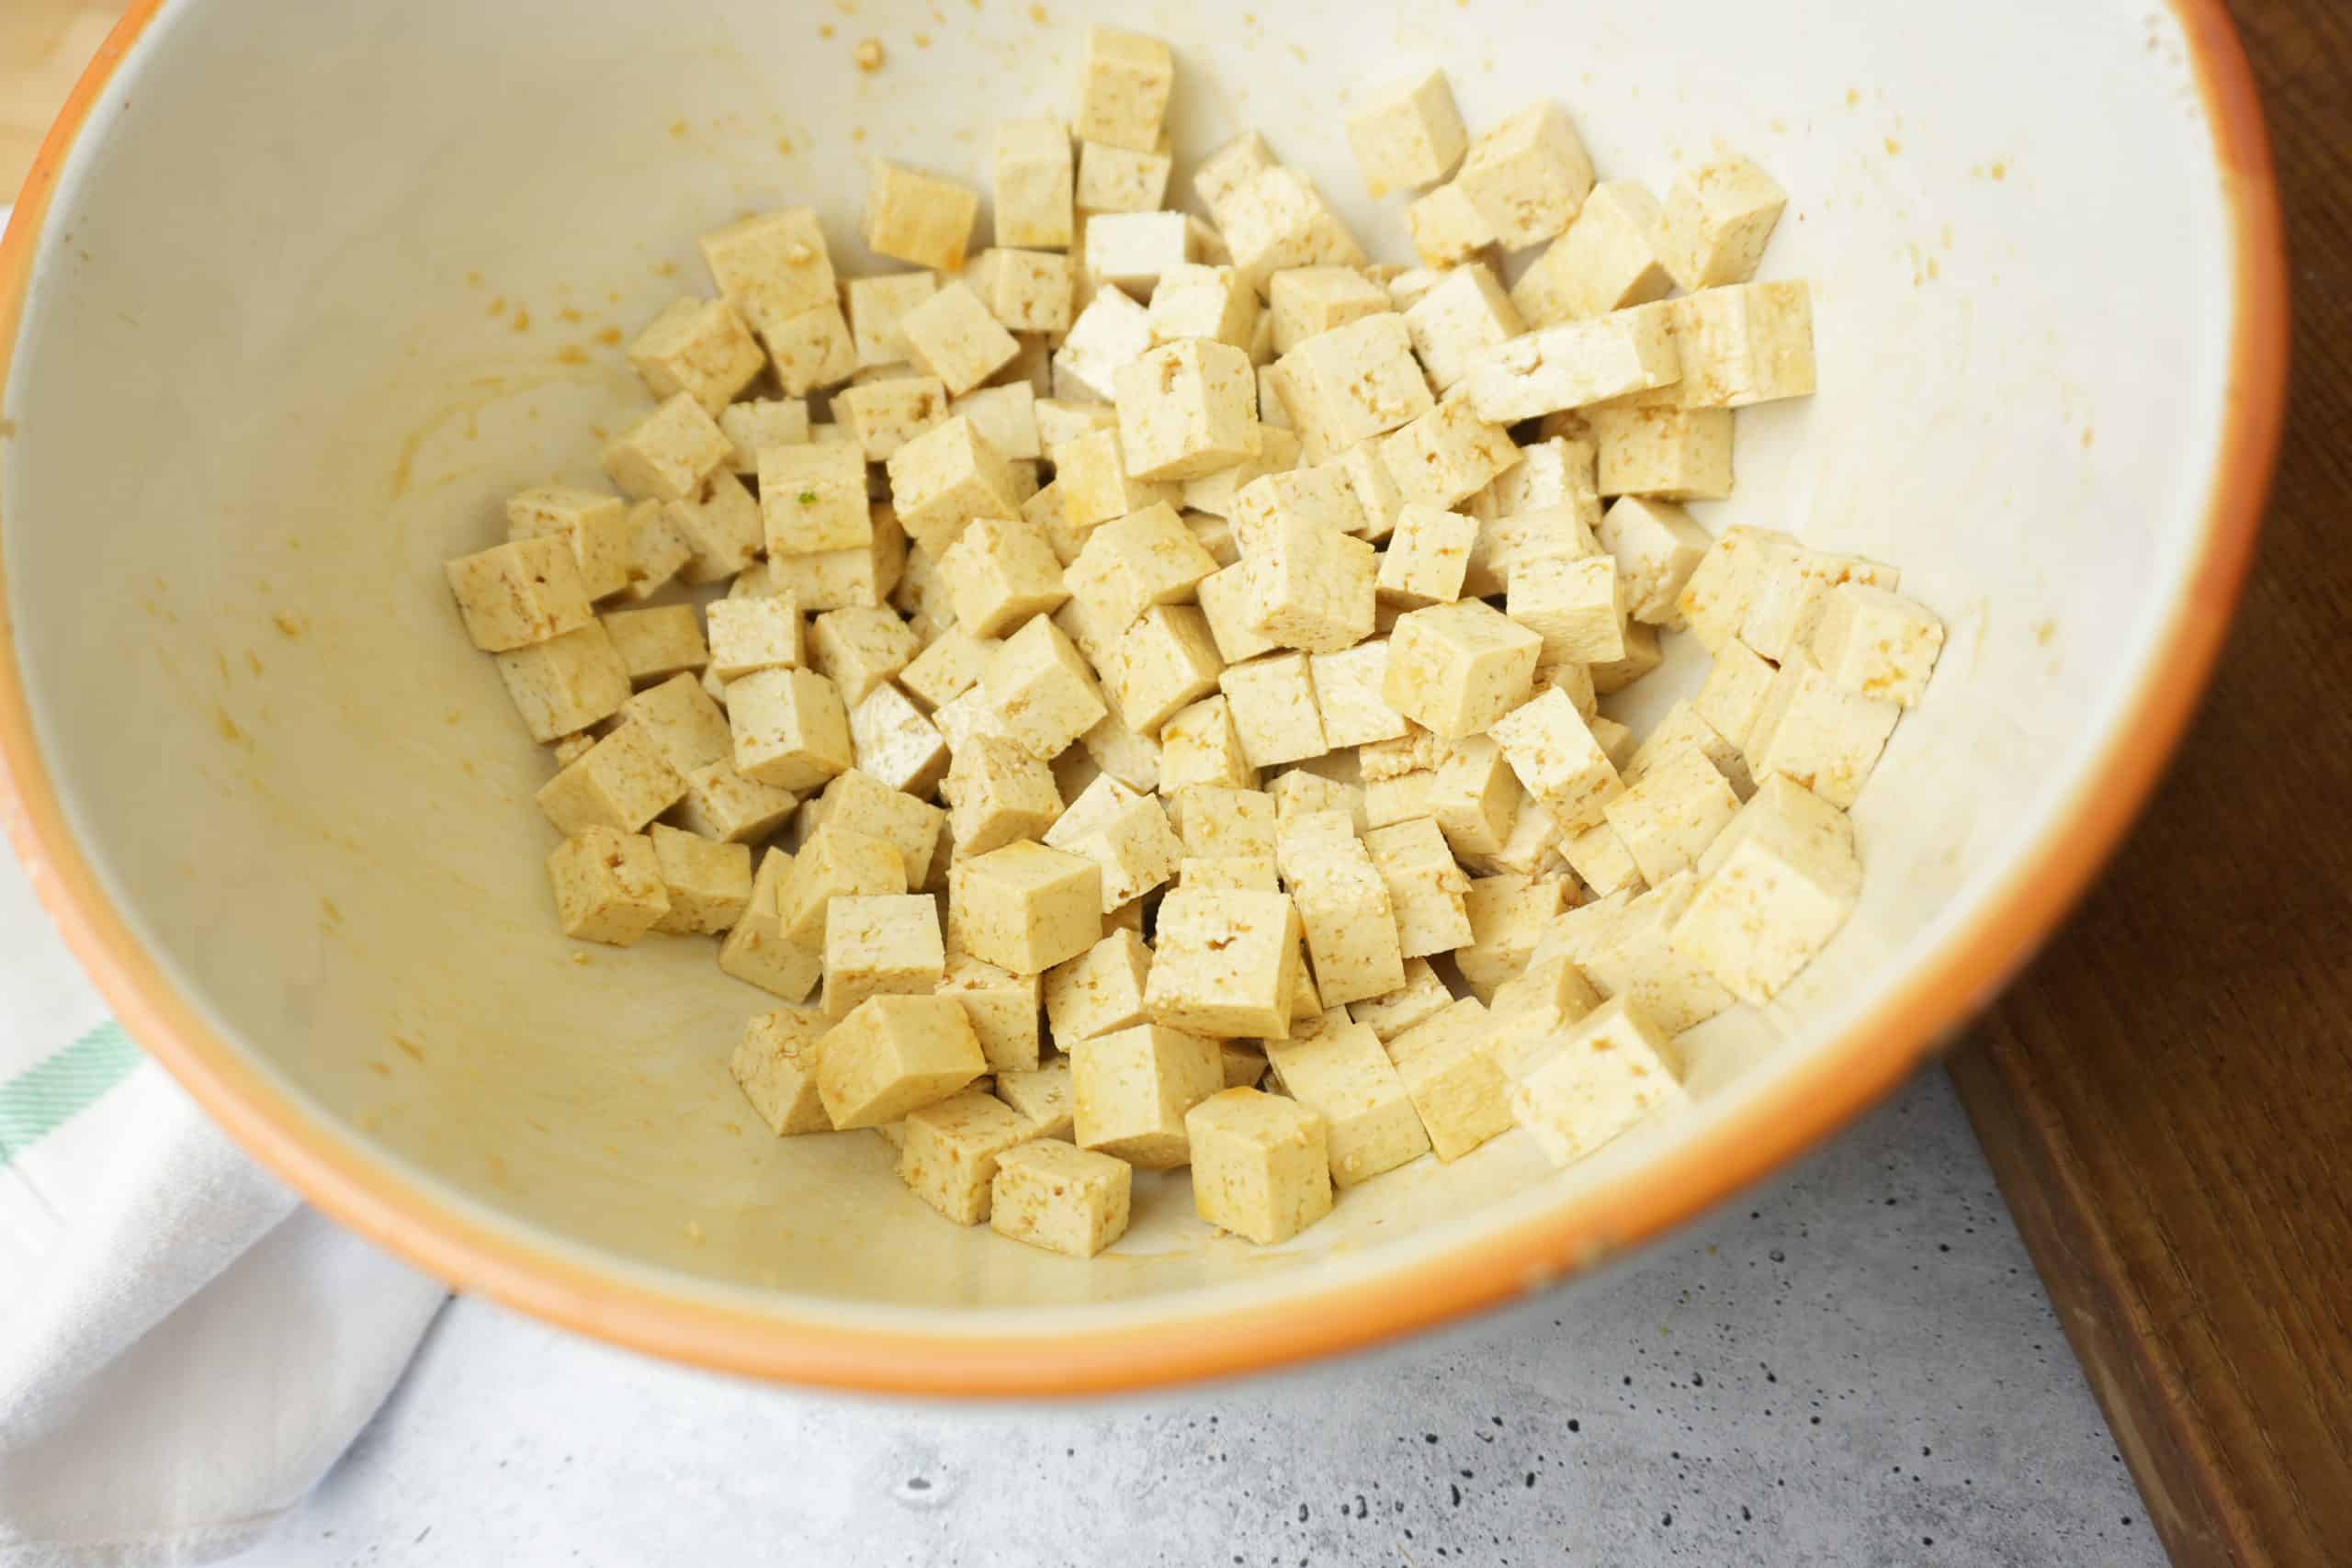 Seasoned cubes of tofu in a white ceramic bowl ready to be roasted in the oven.